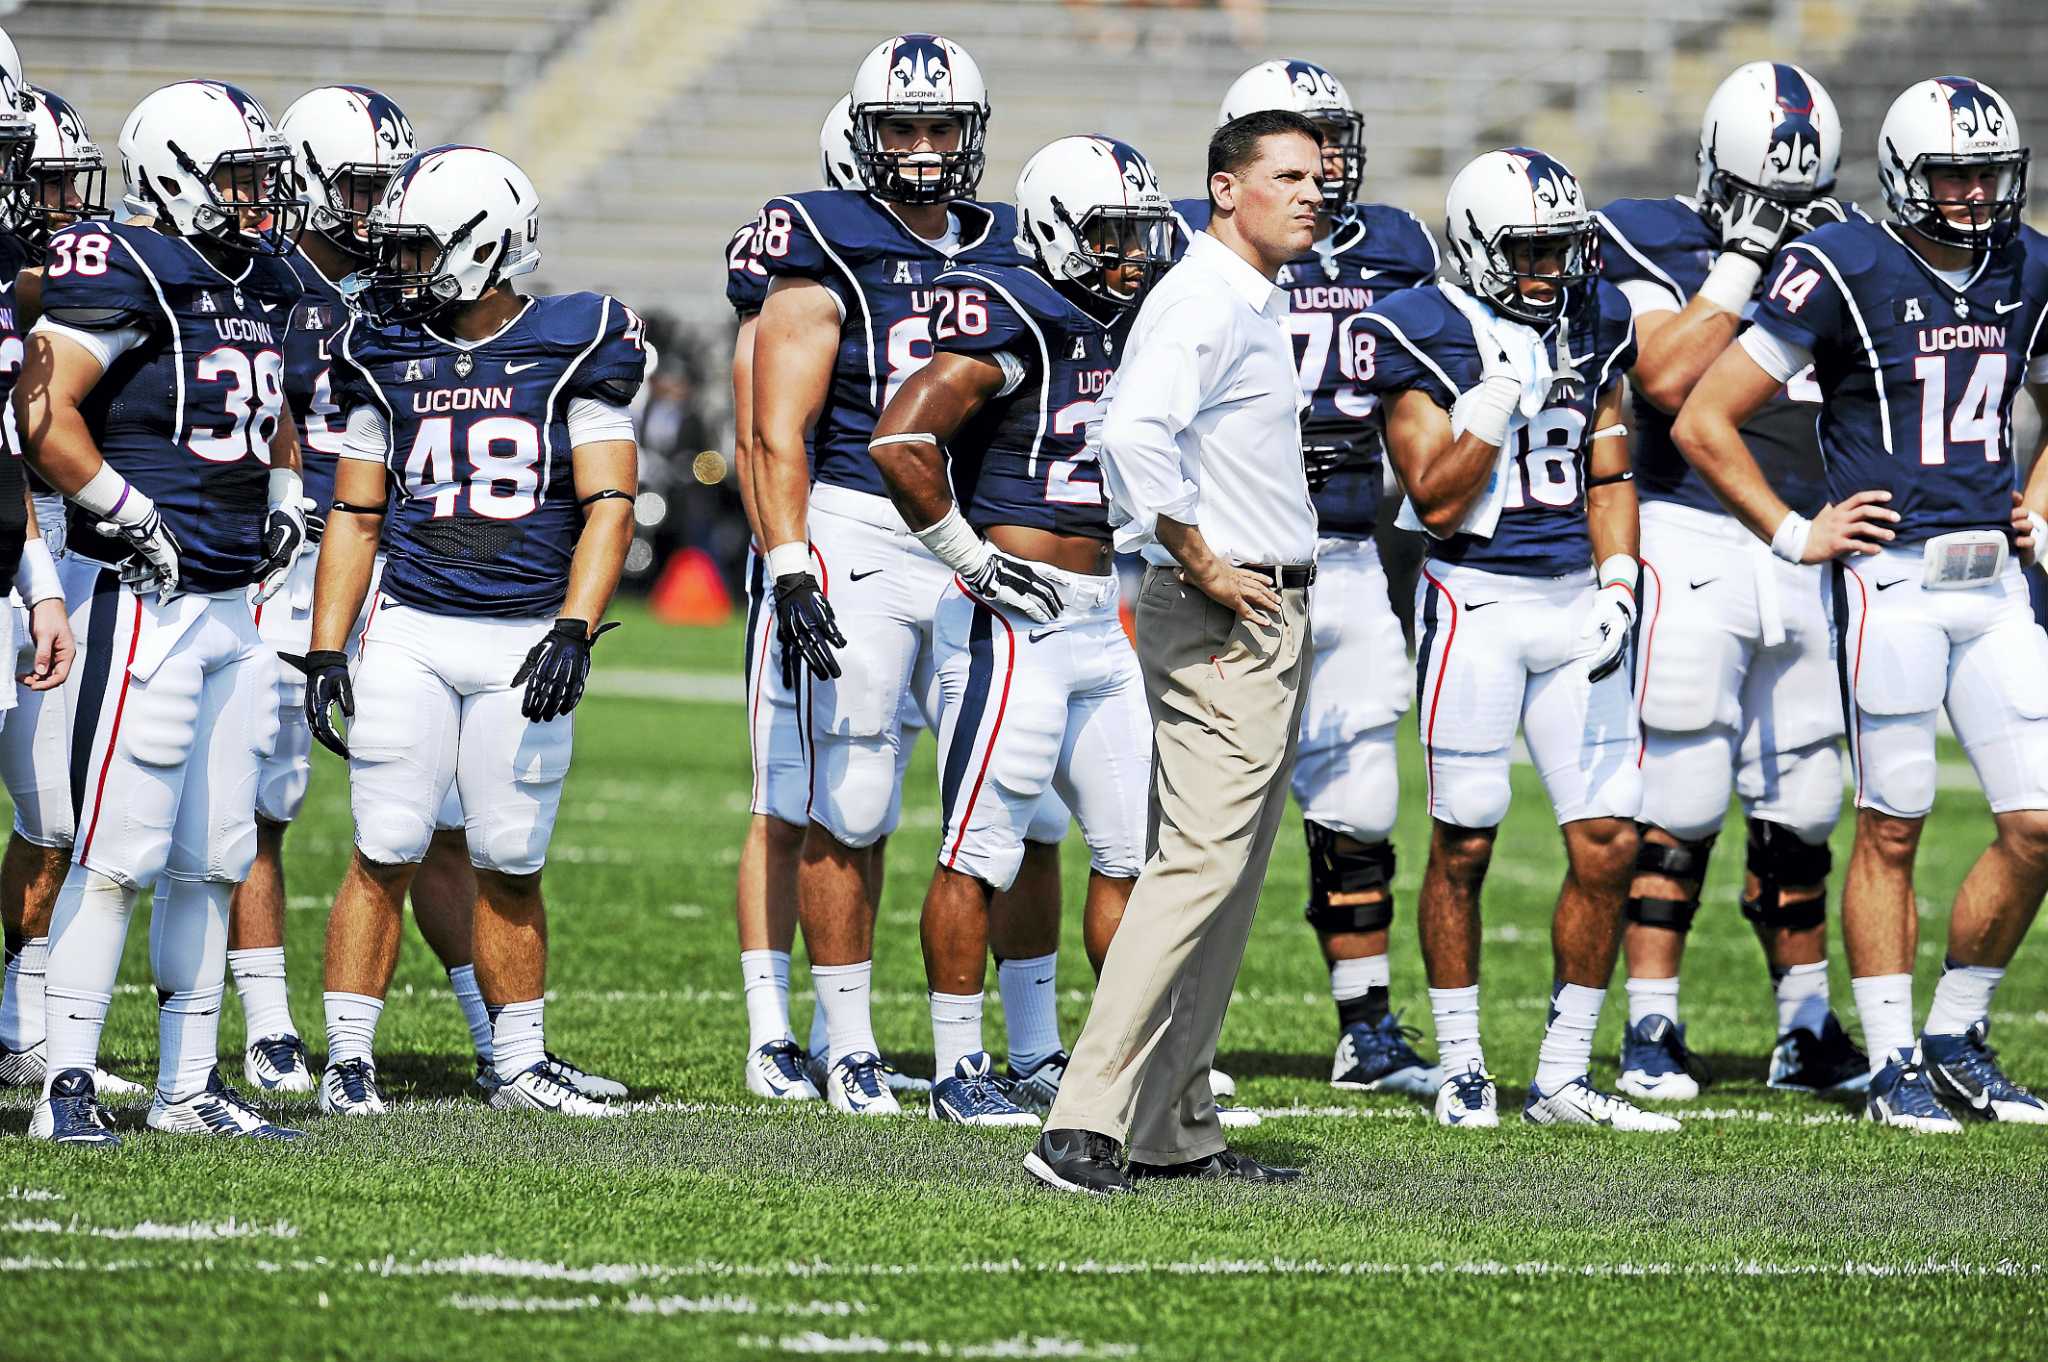 UConn football team gets some reps in the heat at sweltering practice